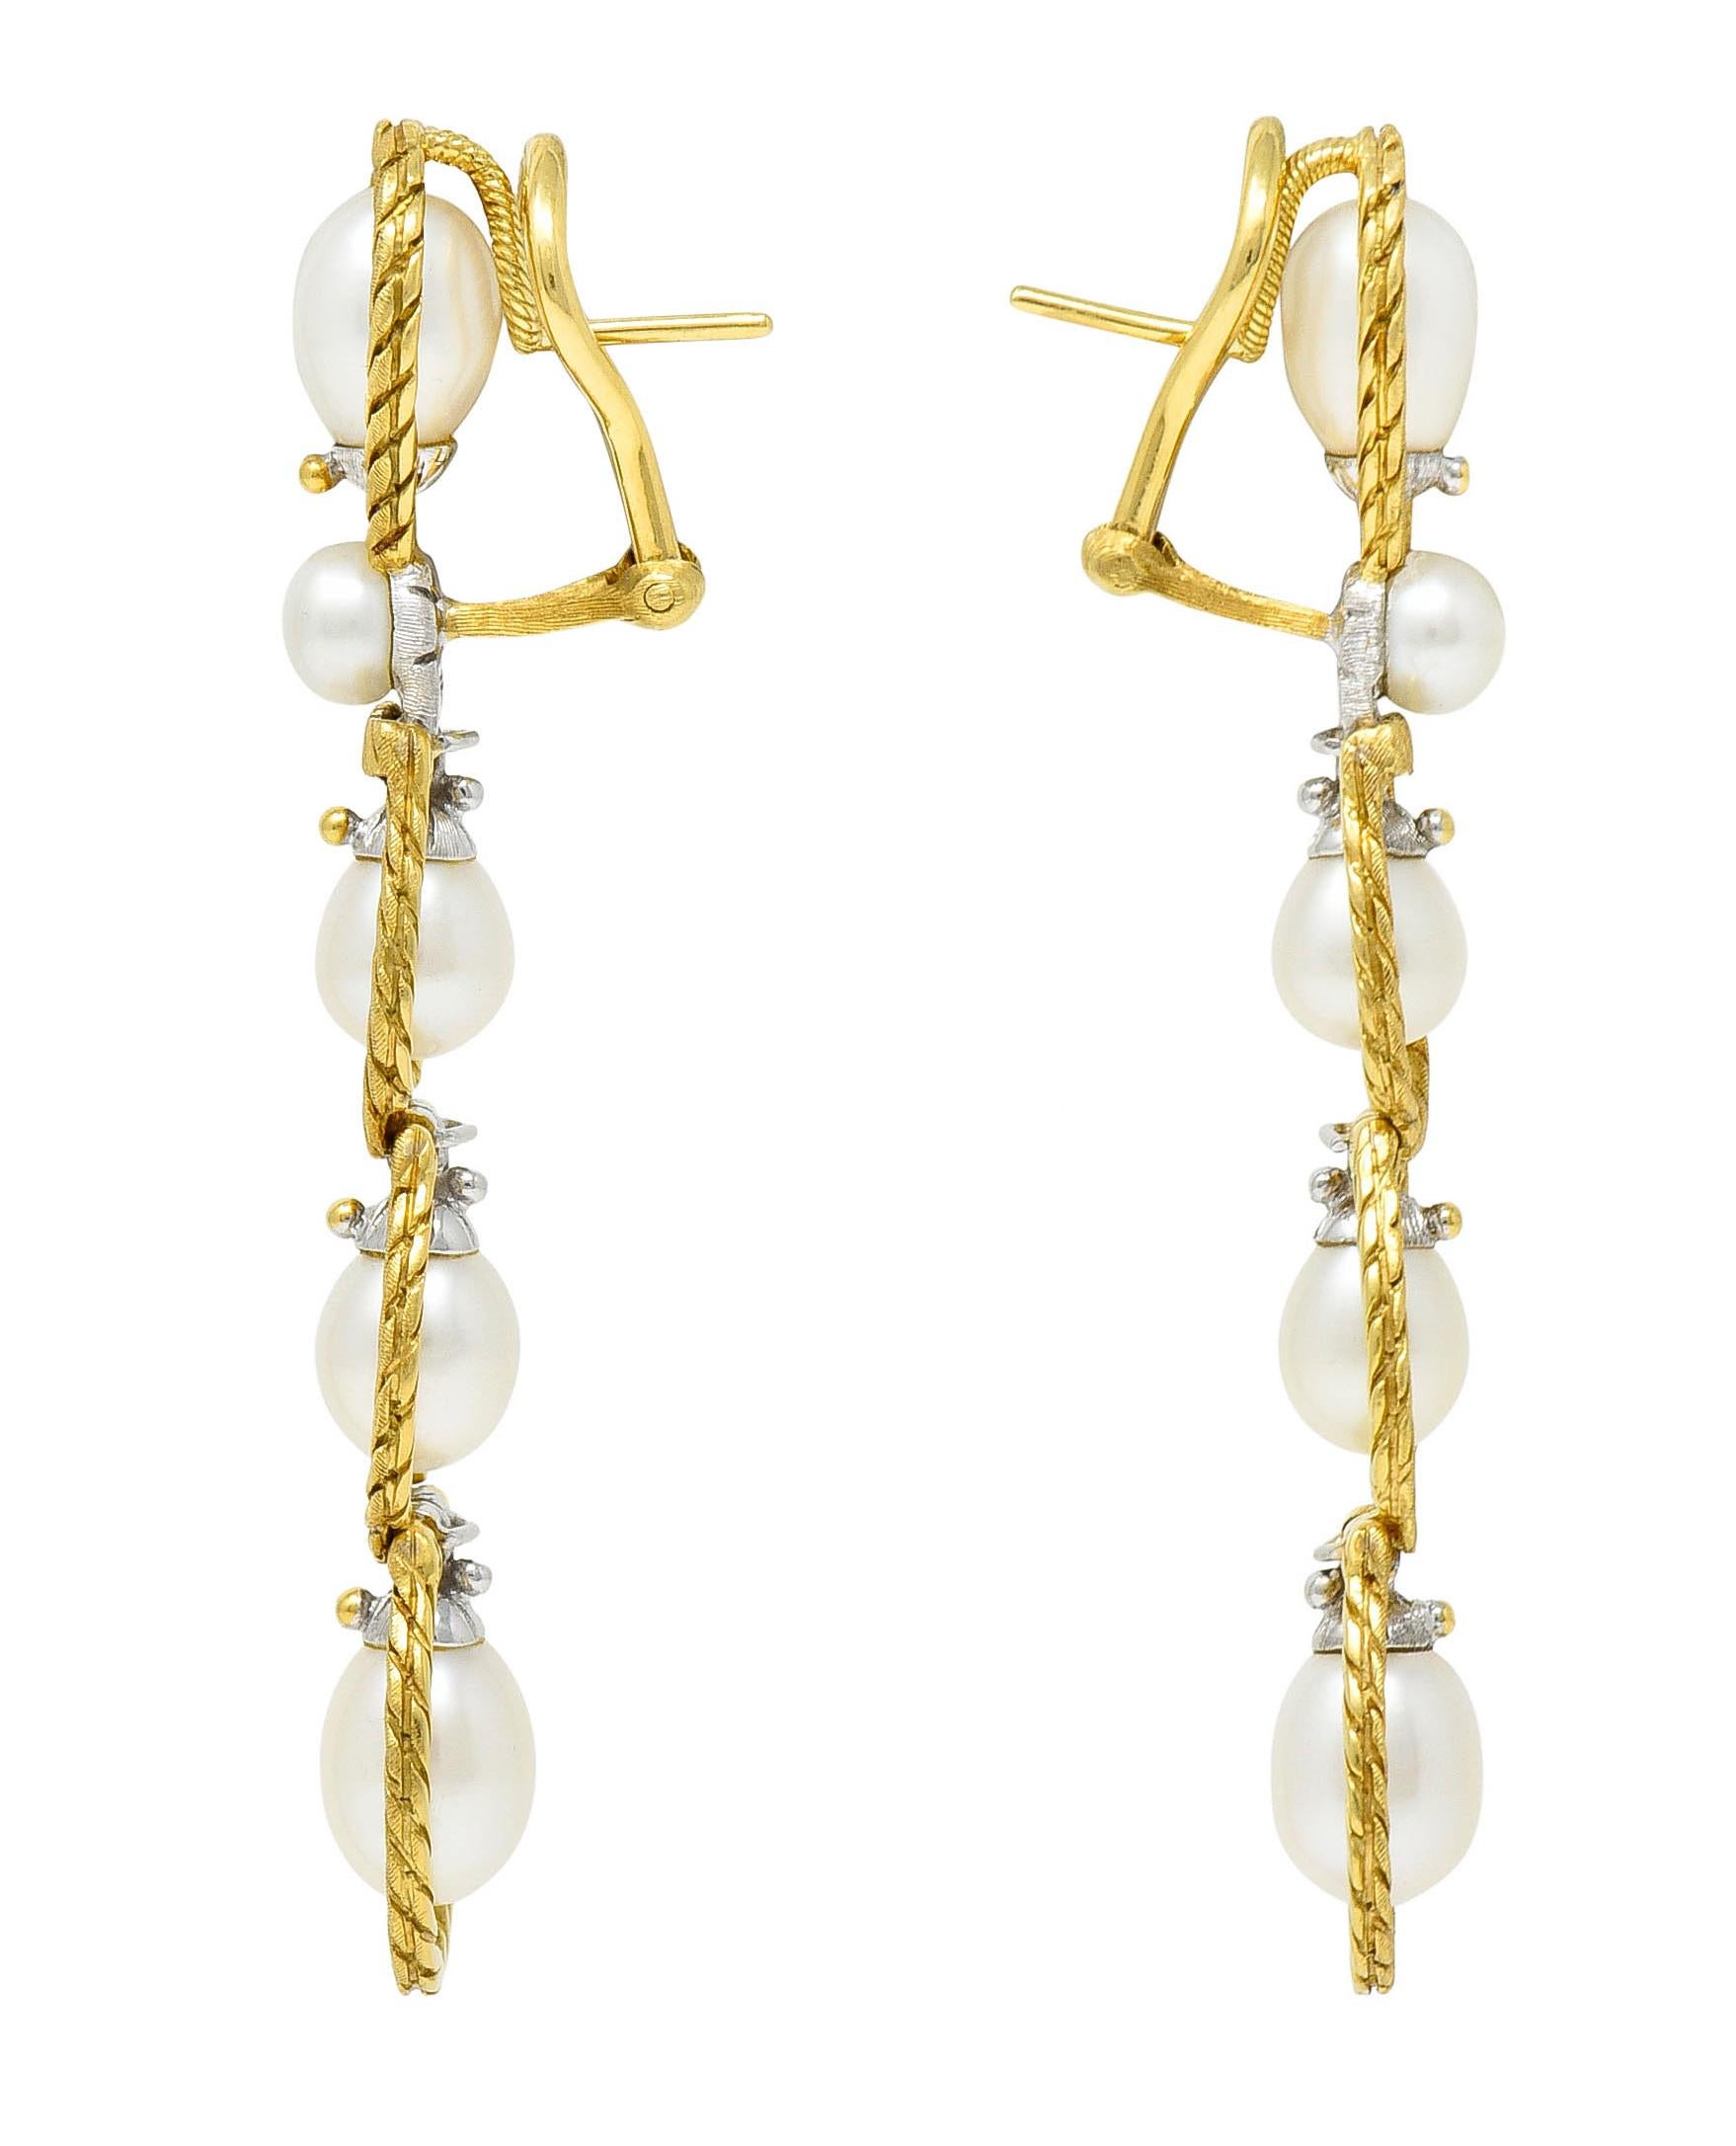 Long drop earrings feature round and drop pearls - some articulated

Well matched in white body color with very good luster

Measuring from 5.0 mm to 6.5 x 8.0 mm - seated in white gold pearl cups

Each surrounded by twisted rope frames - matte